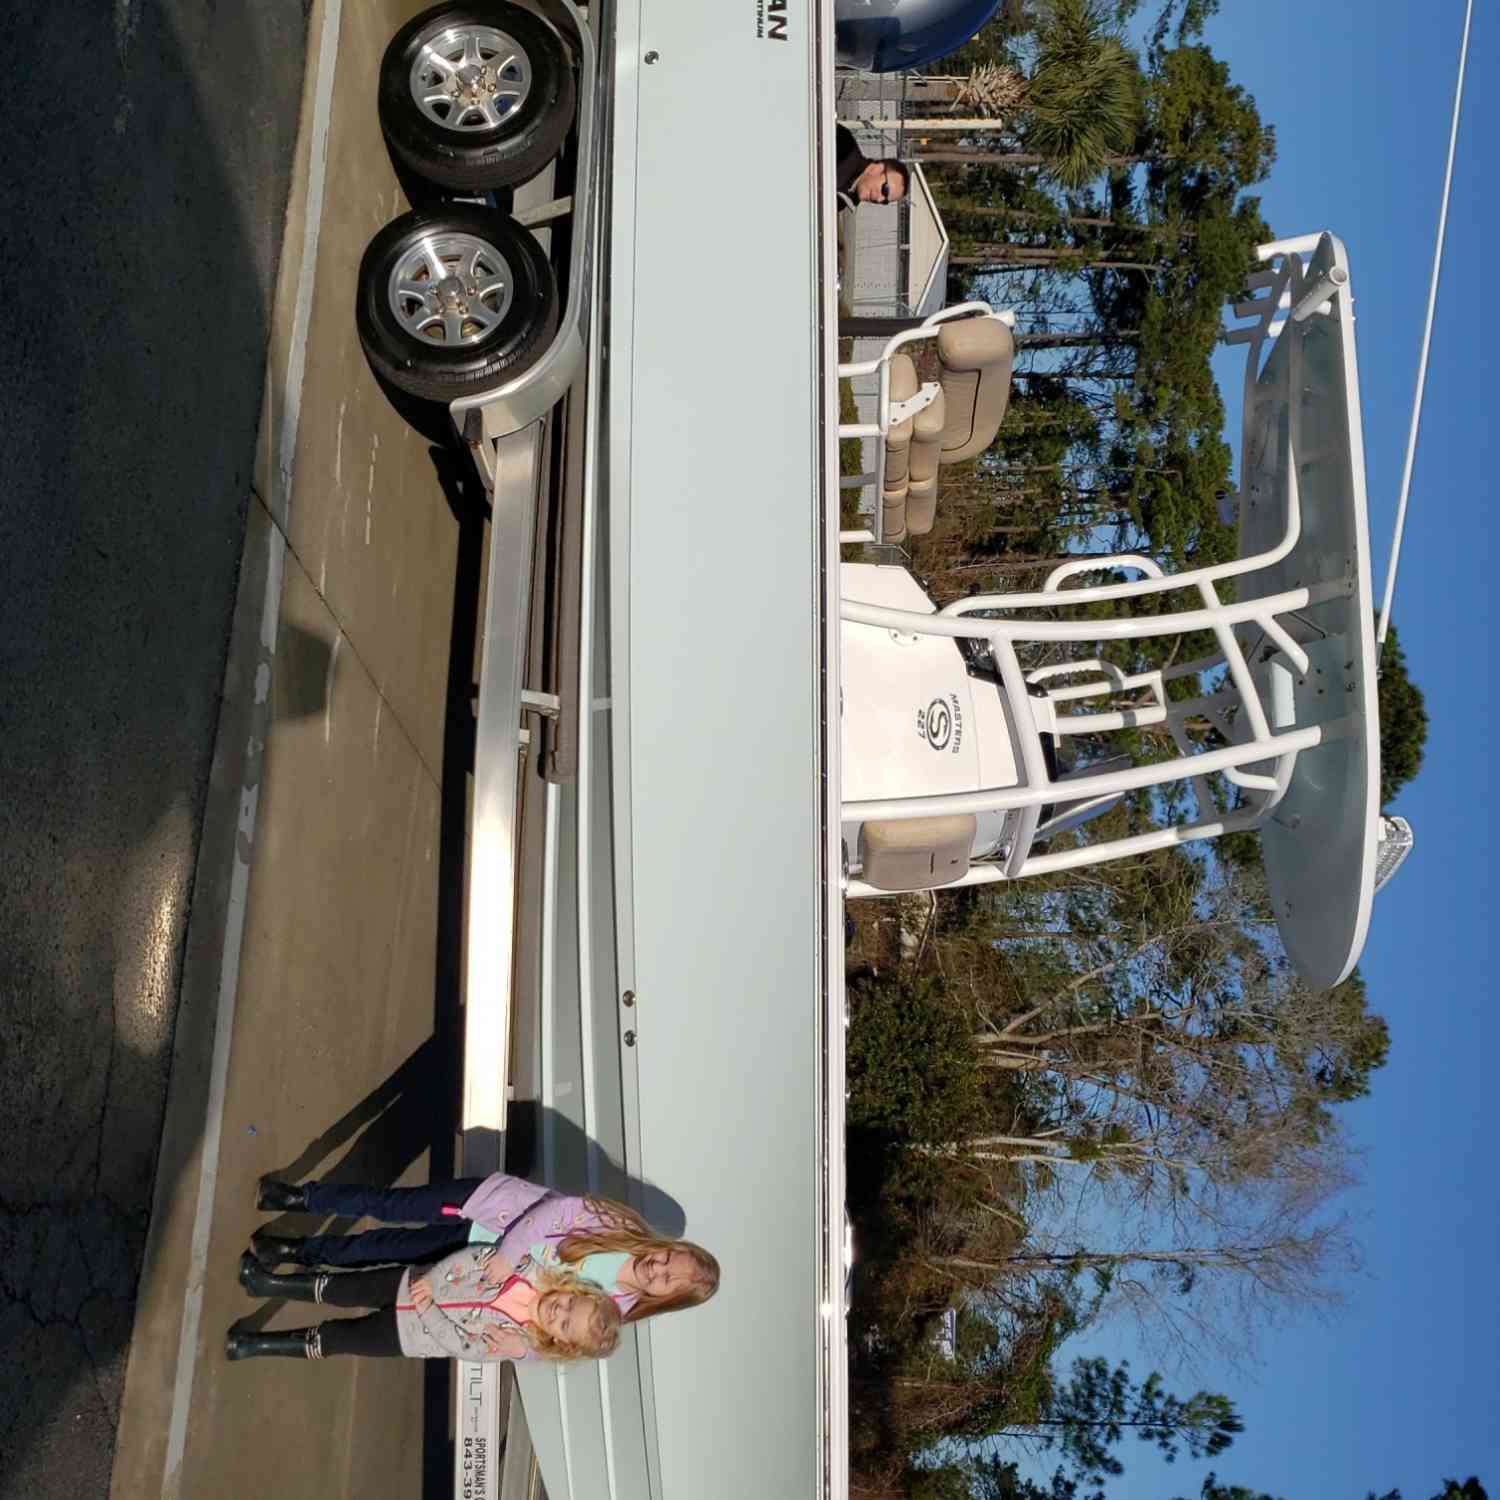 My 2 daughters with our new boat on pick up day!